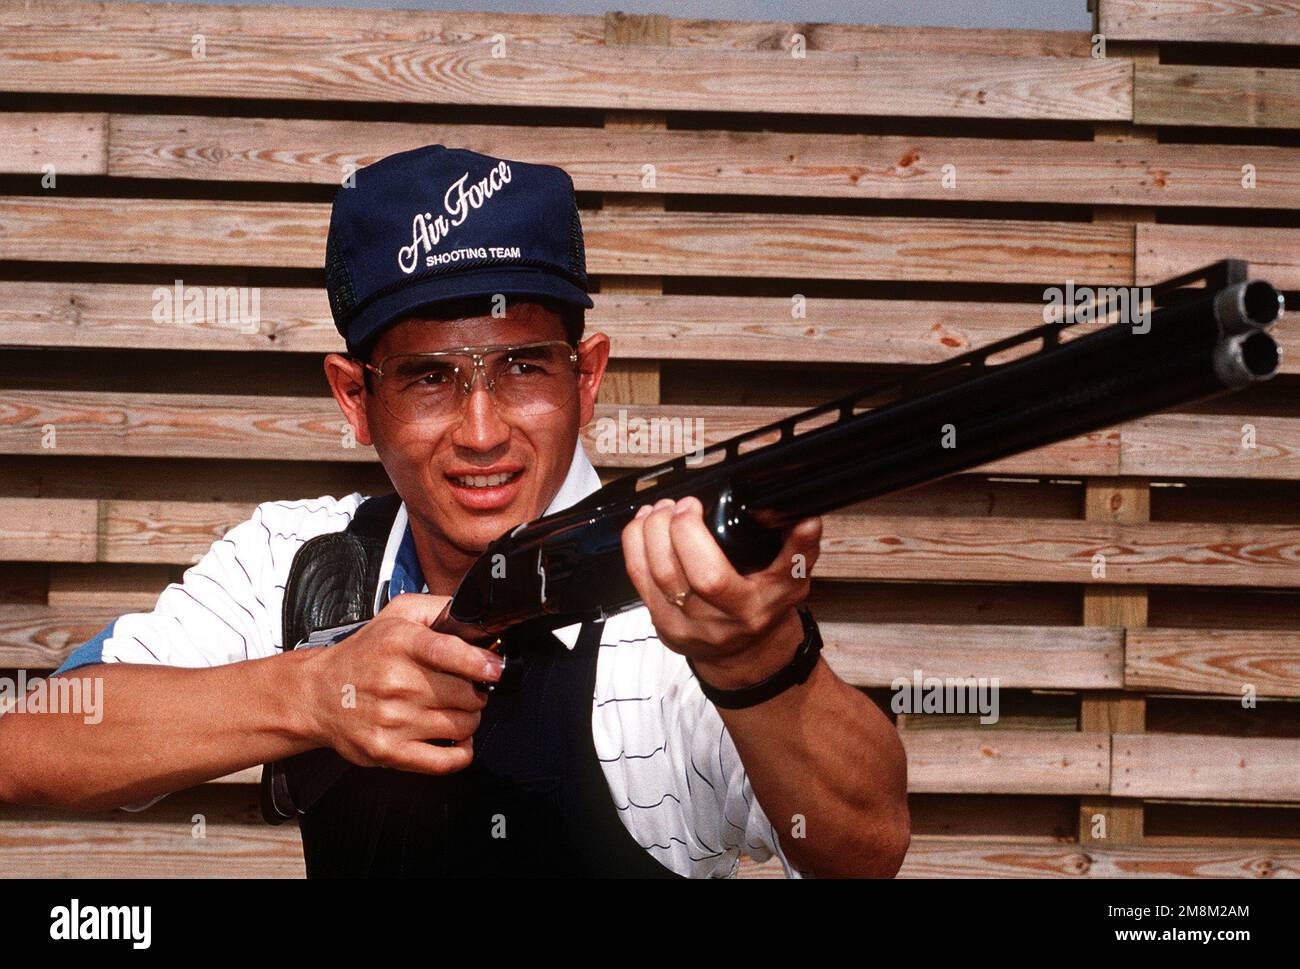 MAJ. Bill Roy, a member of the 1996 U.S. Olympic team and the Air Force's World Class Athlete Program, practices his shooting skill for the summer games in Atlanta. MAJ. Roy is the reigning National Skeet Shooting Association world champion. PHOTO published in AIRMAN Magazine, June 1996.Exact Date Shot Unknown. Maj. Bill Roy, a member of the 1996 U.S. Olympic team and the Air Force's World Class Athlete Program, practices his shooting skill for the summer games in Atlanta.  Maj. Roy is the reigning National Skeet Shooting Association world champion.  Photo published in Airman Magazine, June 19 Stock Photo